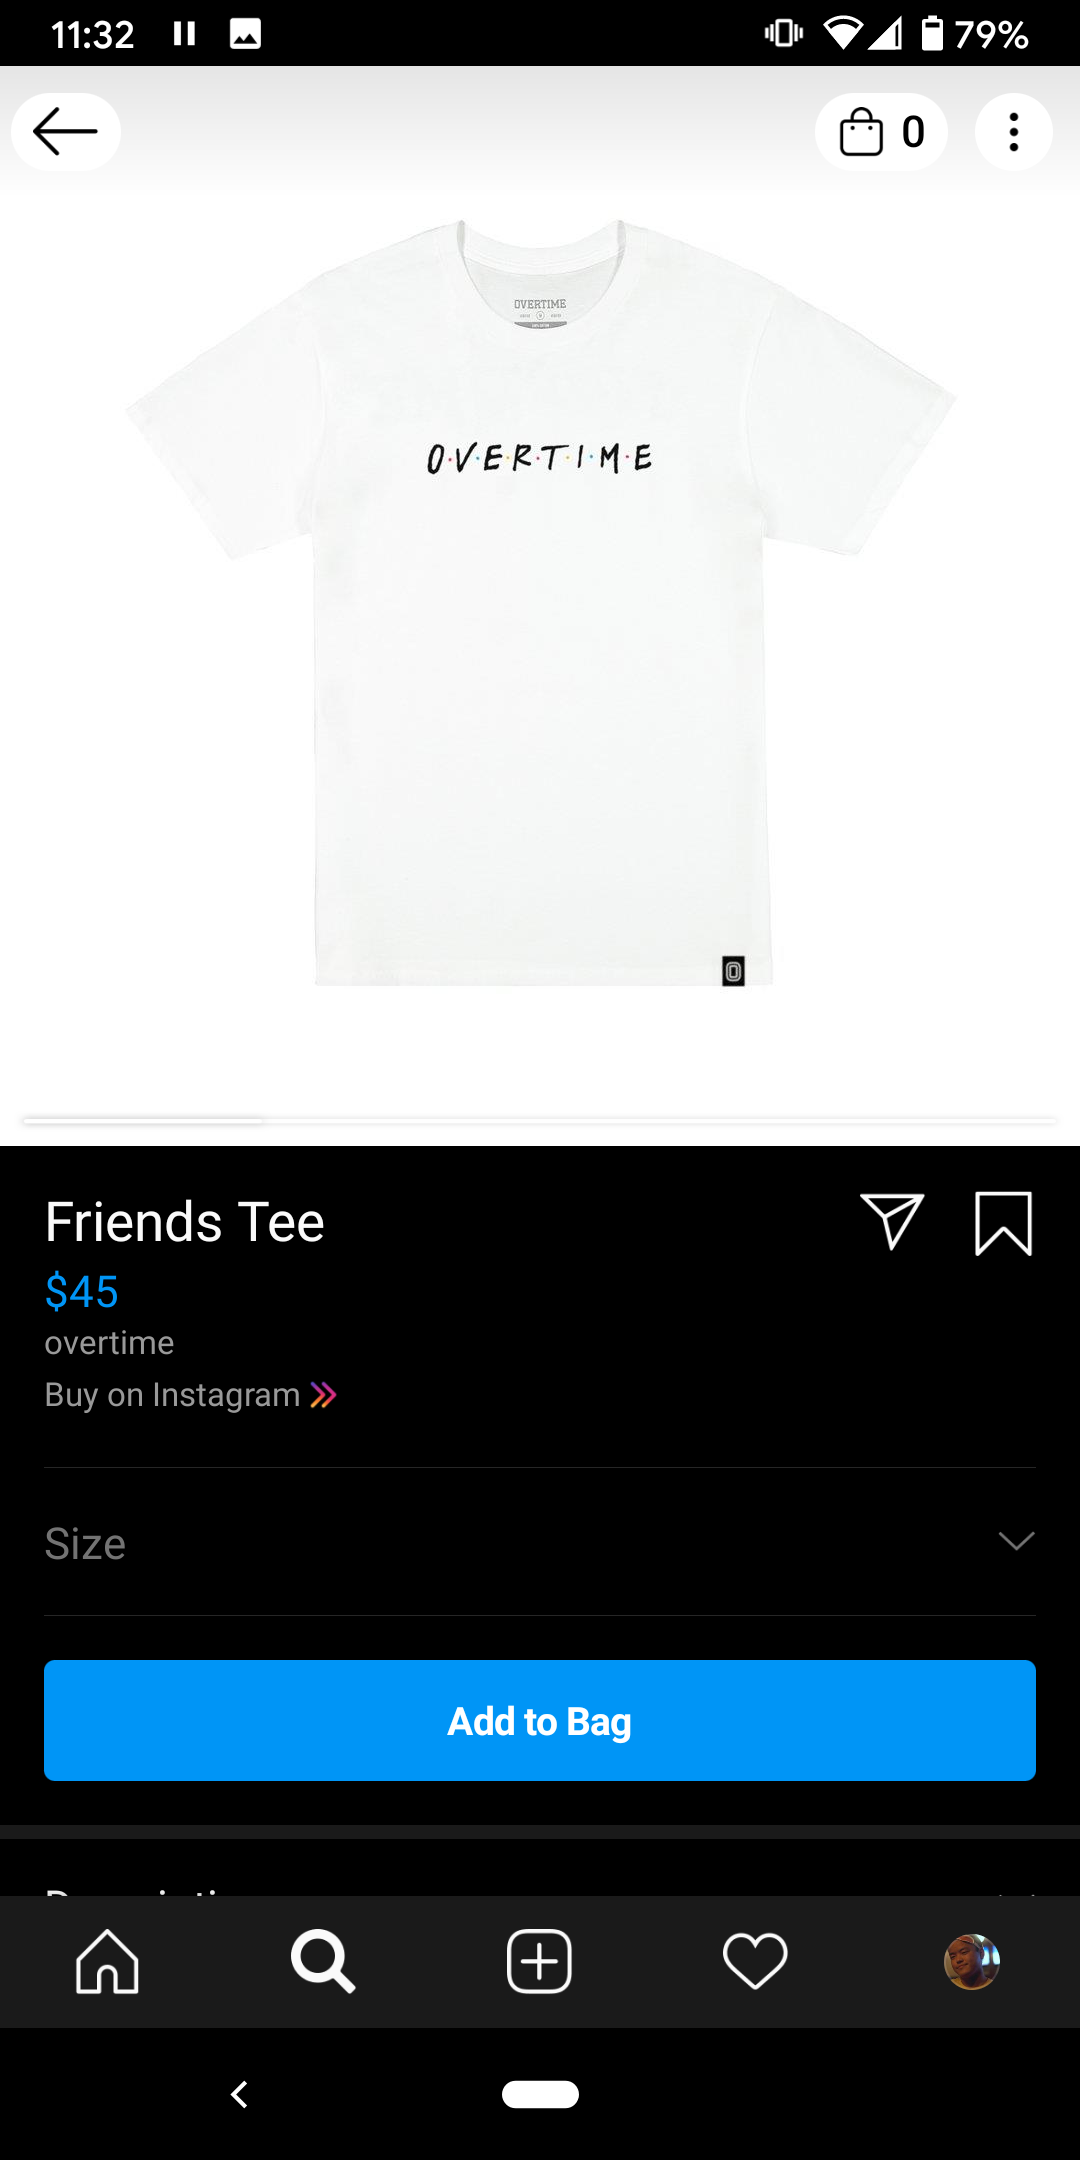 Instagram Shop UI- you can add directly to your IG bag